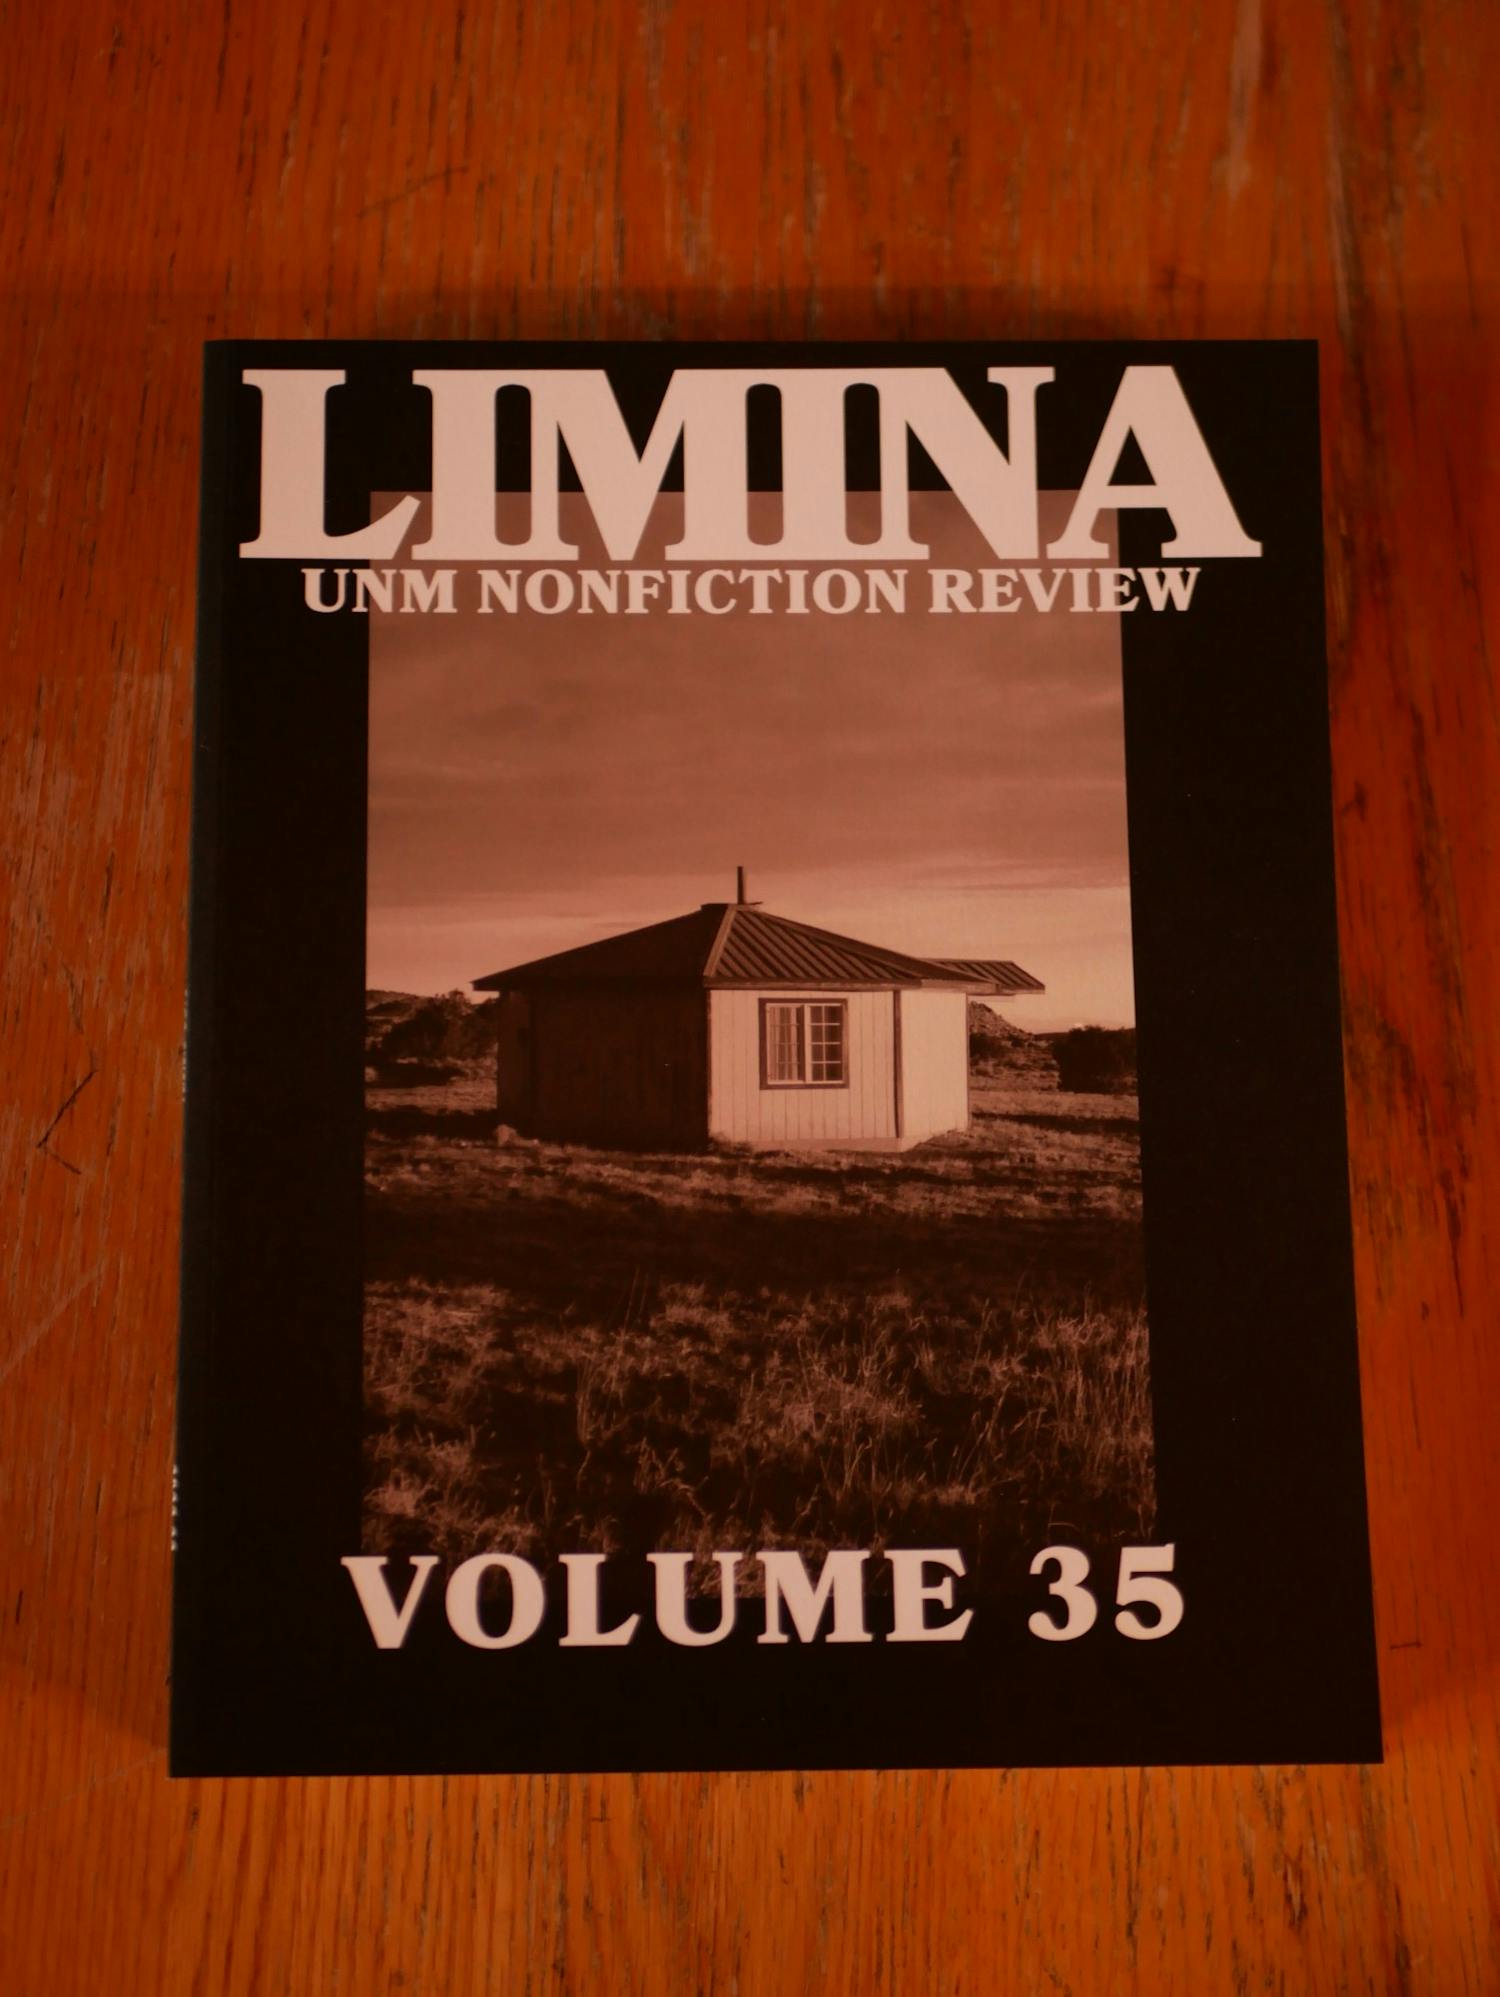 GALLERY: Limina Release Party